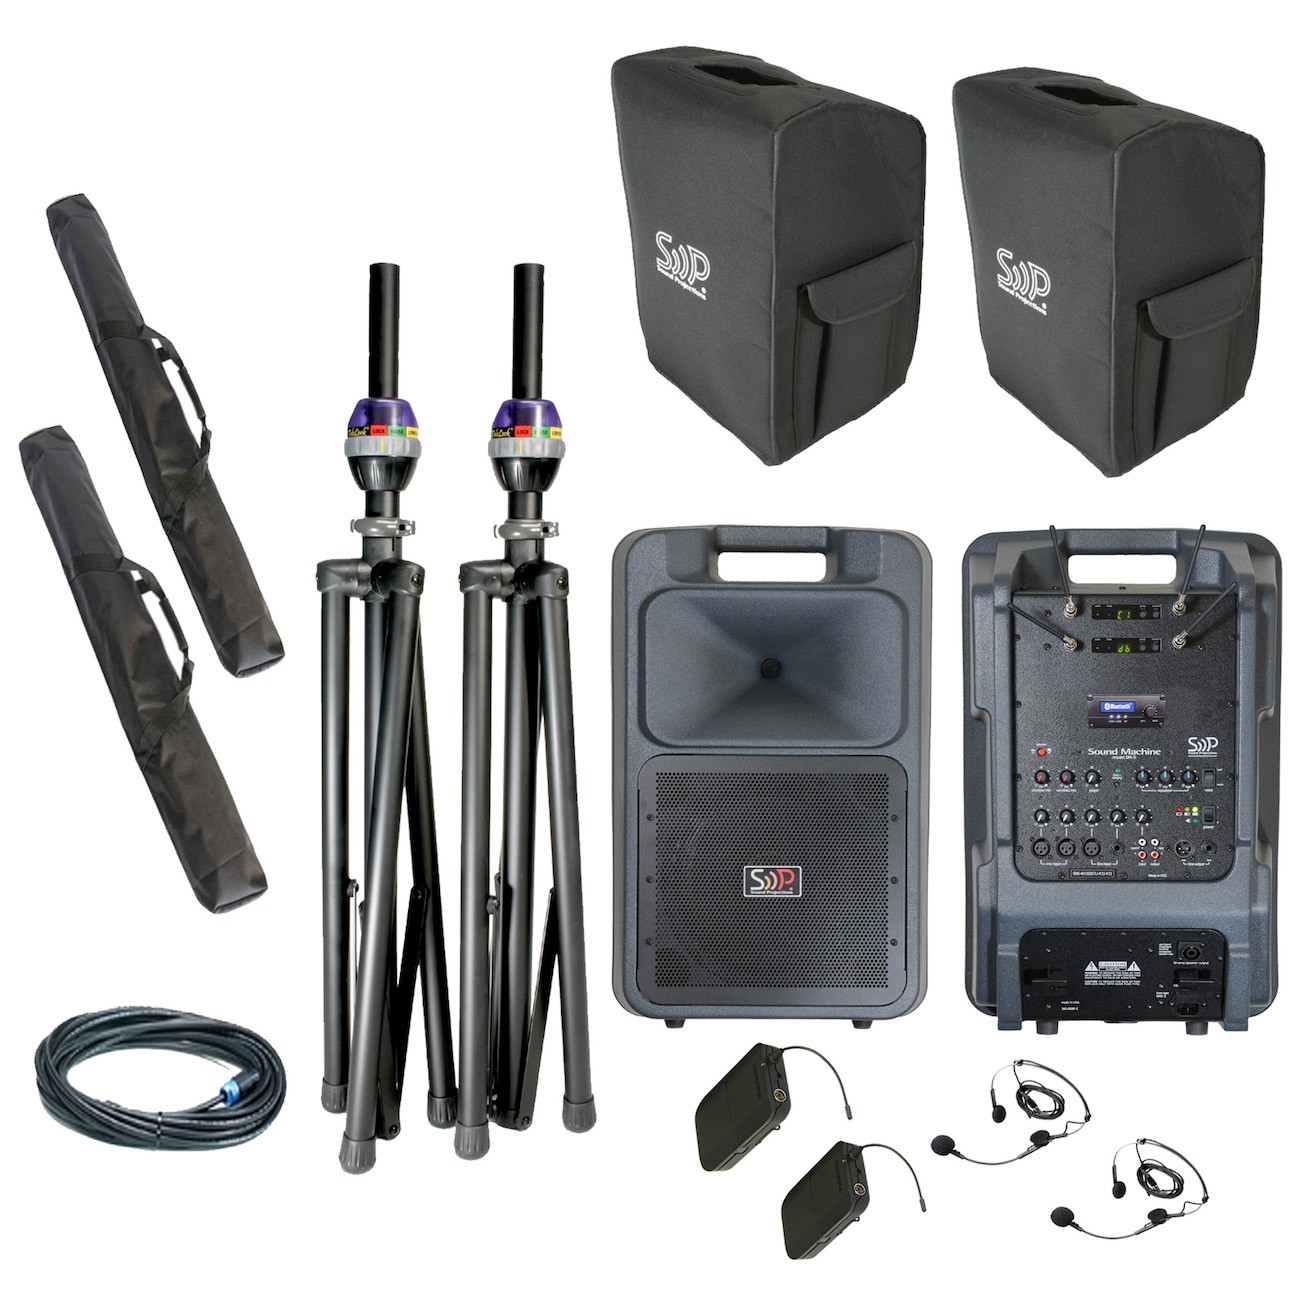 SM-5 Deluxe Dual UHF headset wireless OPT-600 BlueTooth package w_companion speaker